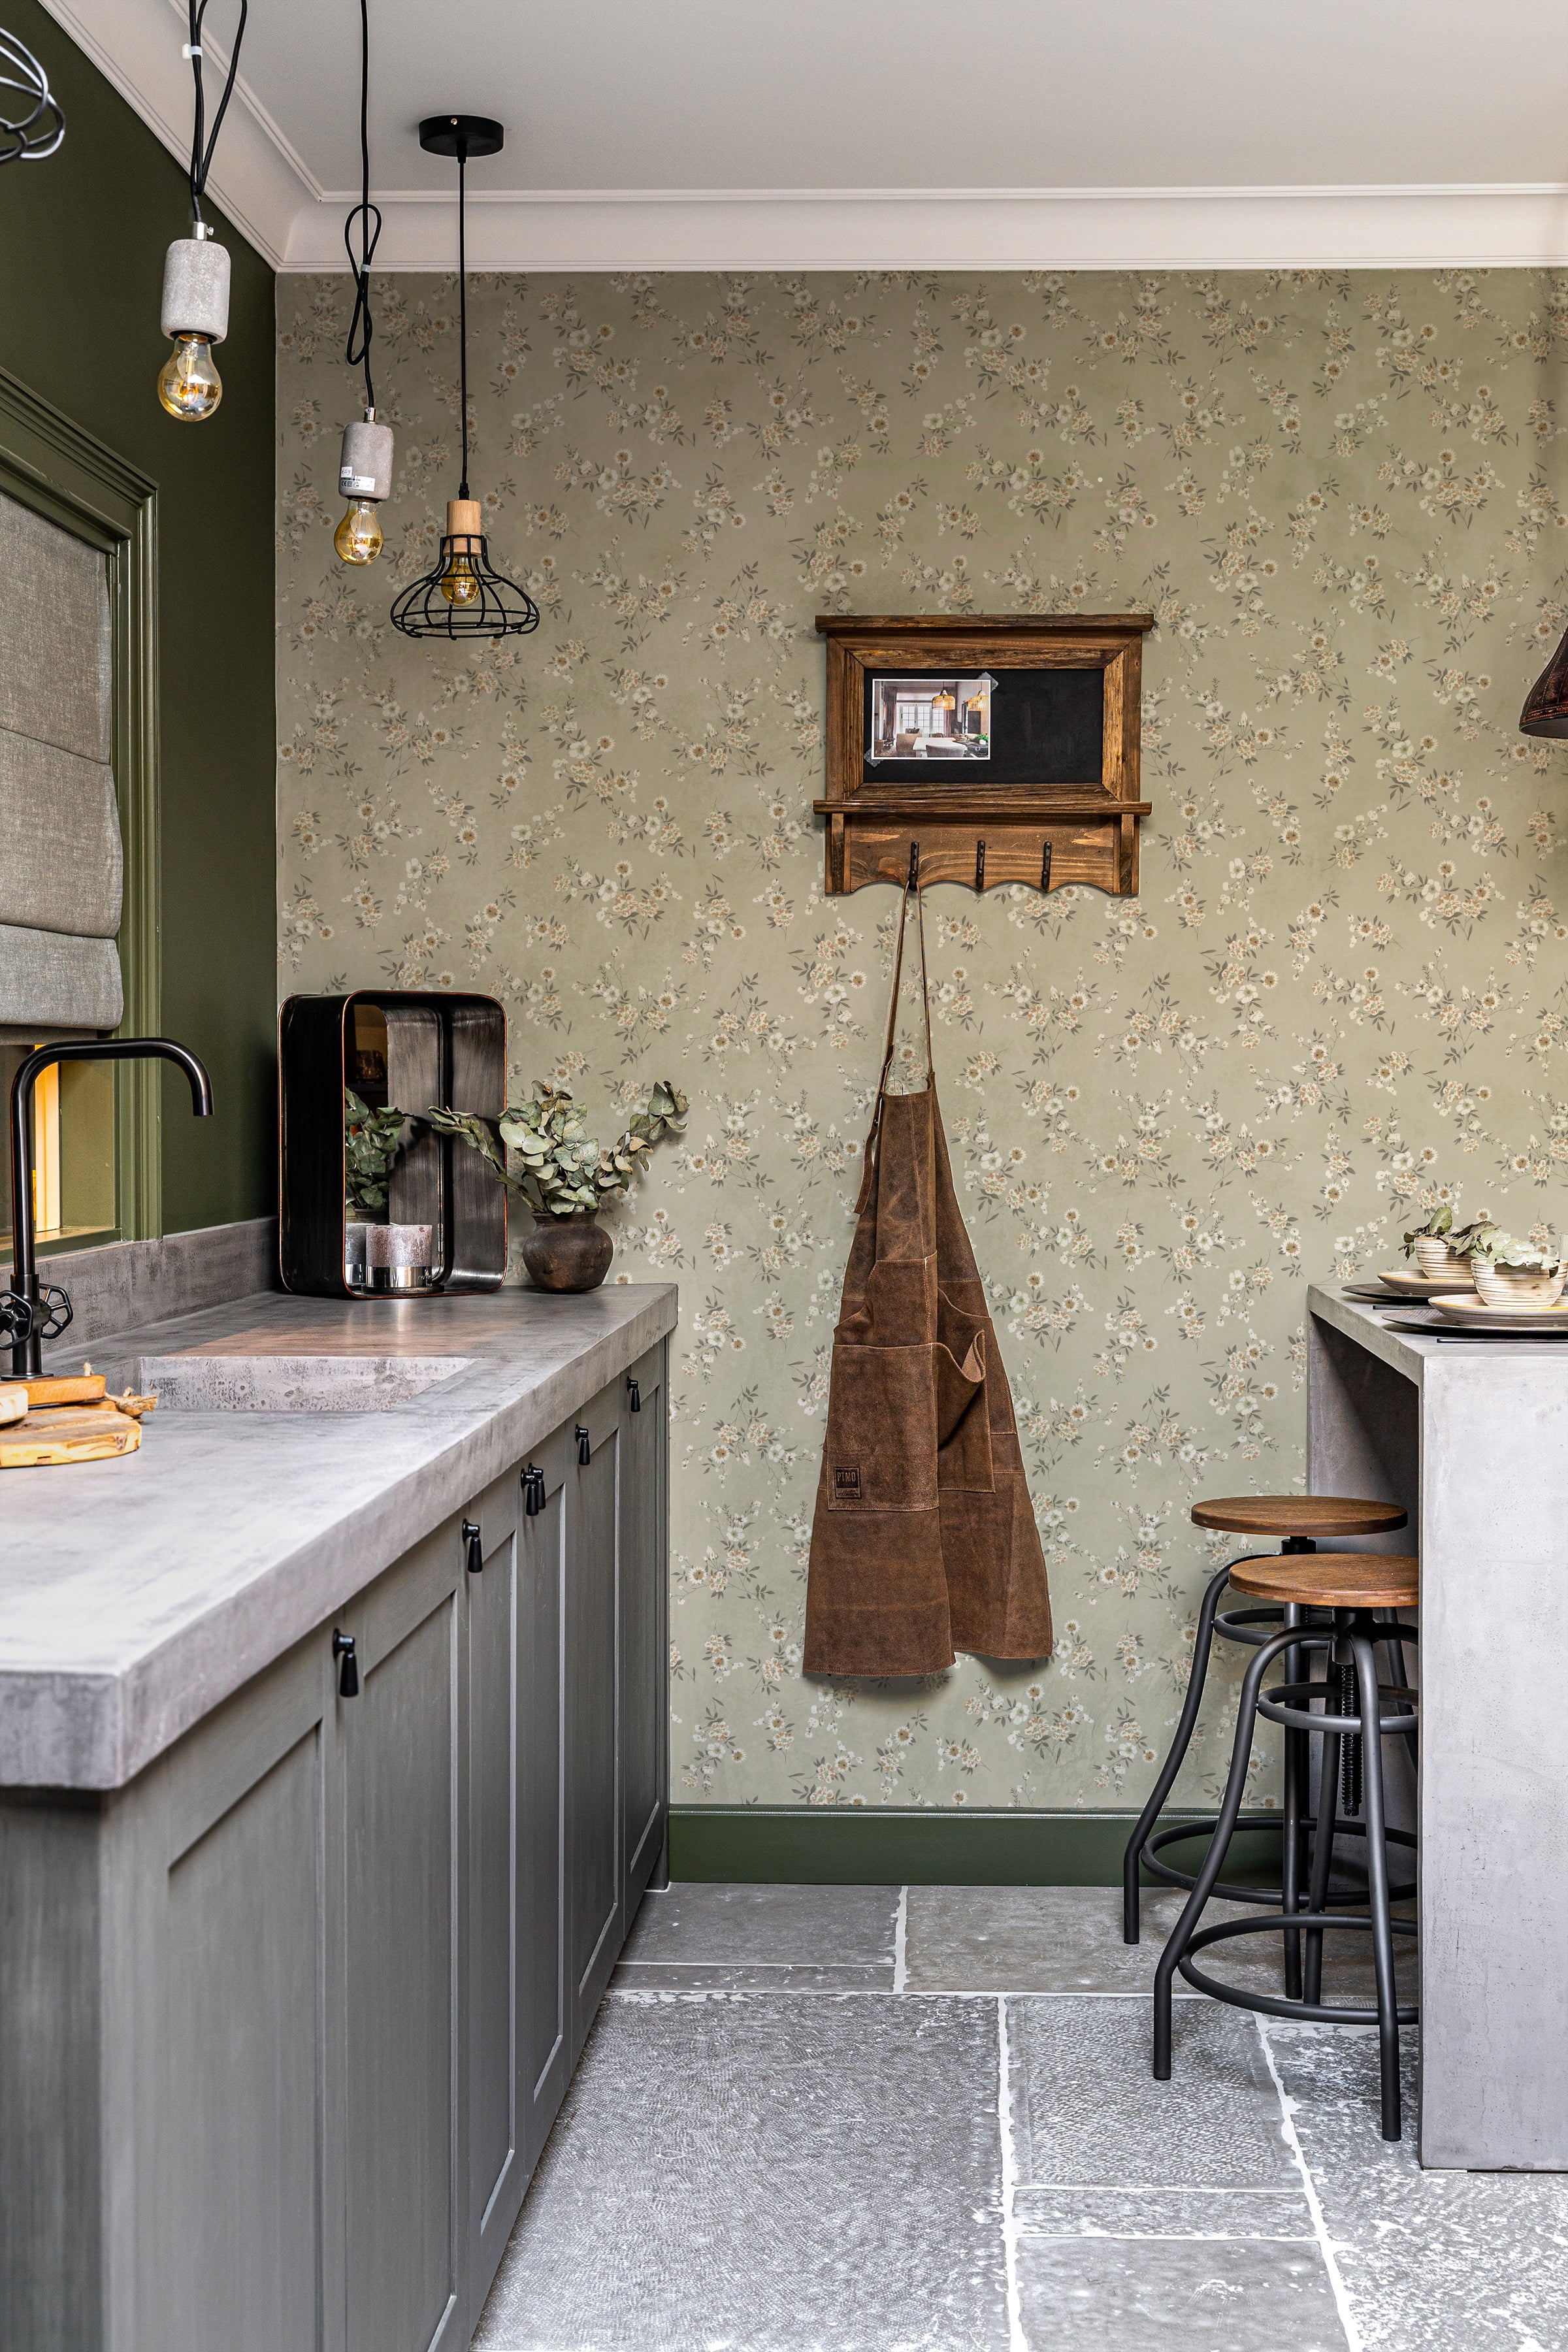 A stylish kitchen featuring the Classic Floral Wallpaper with a muted olive green base and a delicate pattern of white and tan flowers. The wallpaper adds a touch of vintage charm, complemented by the slate gray cabinetry, a concrete countertop, and industrial-style pendant lights. An apron hangs on a wooden hook, adding a rustic touch to the sophisticated decor.